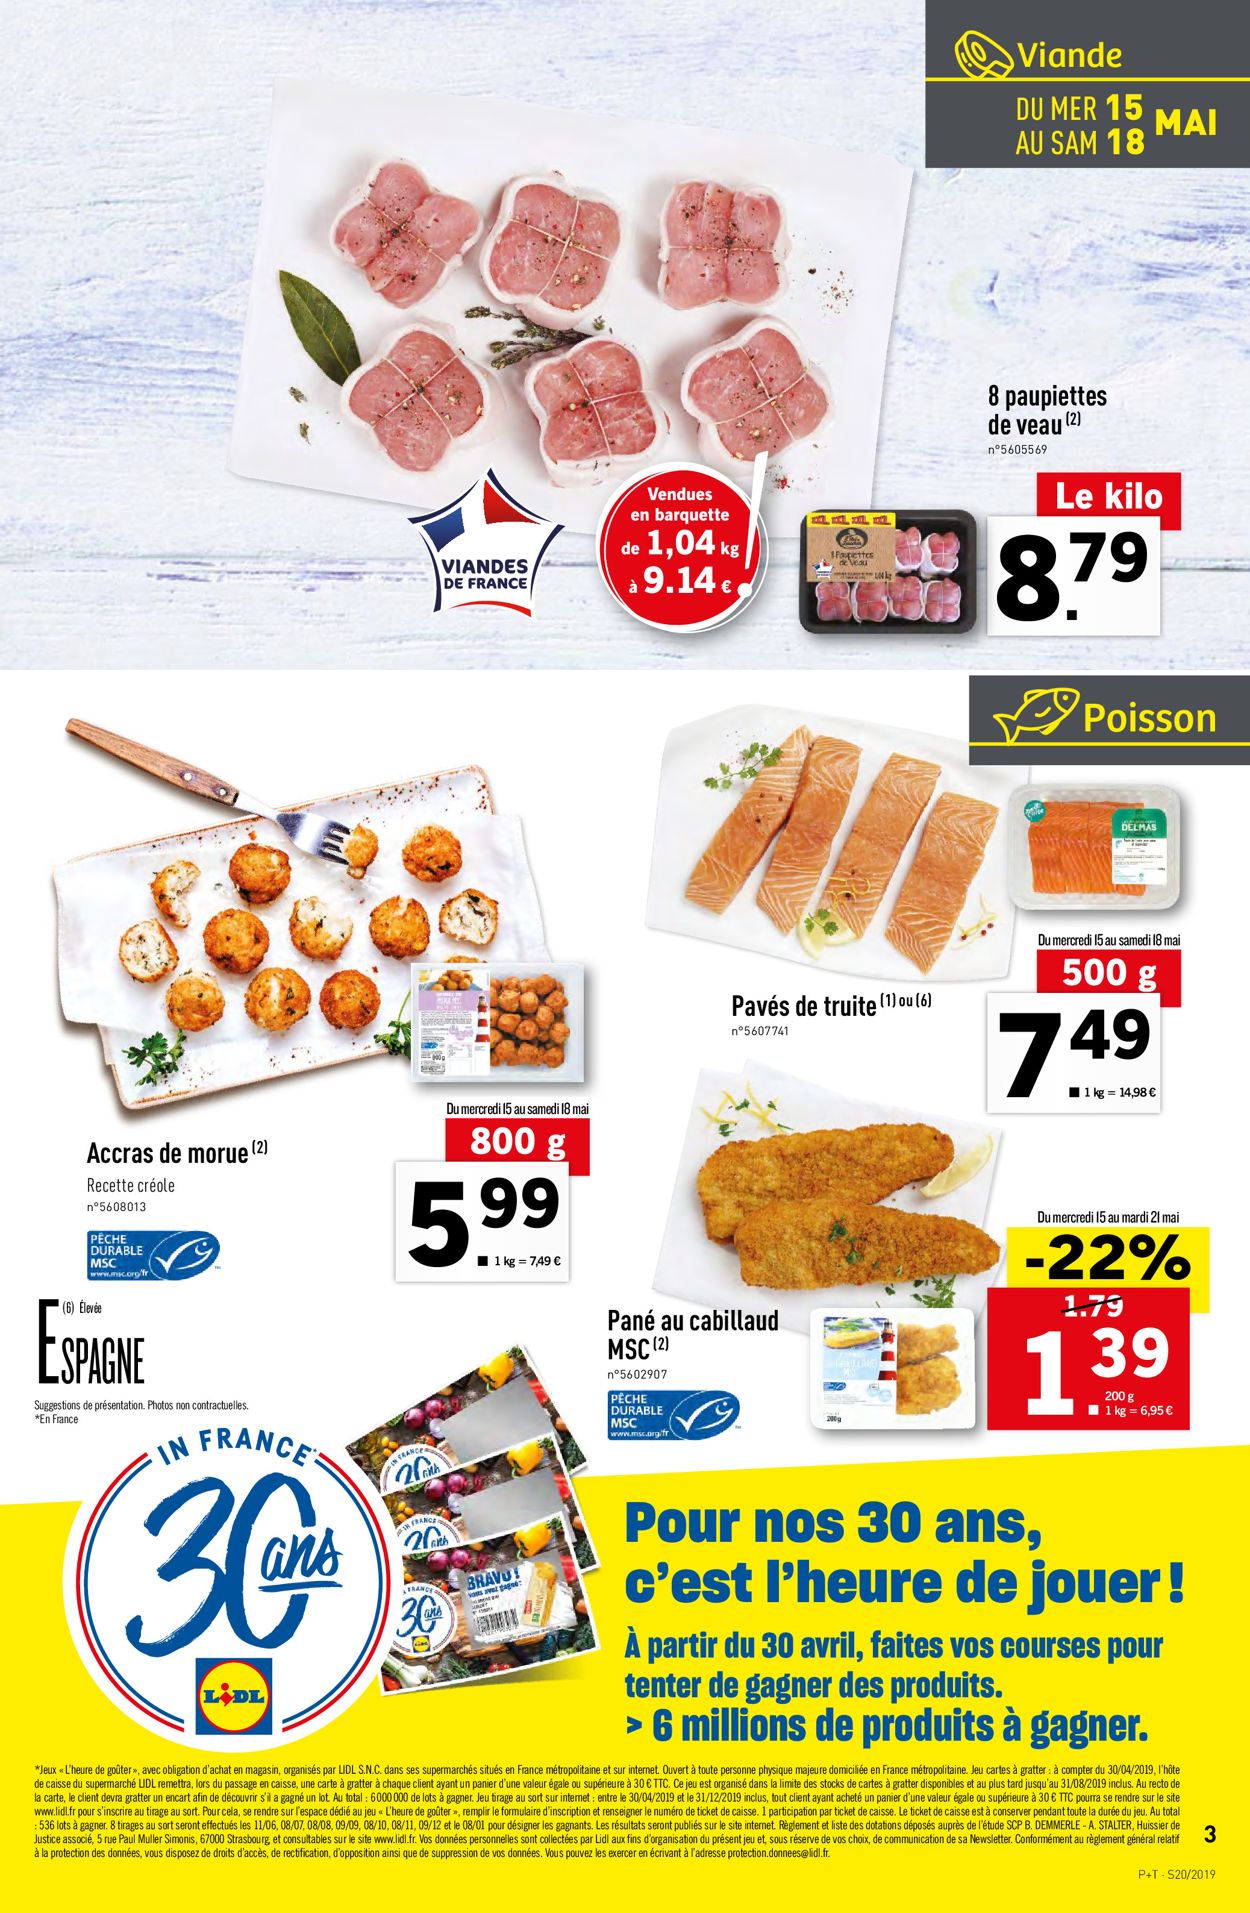 Lidl Catalogue - 15.05-21.05.2019 (Page 3)